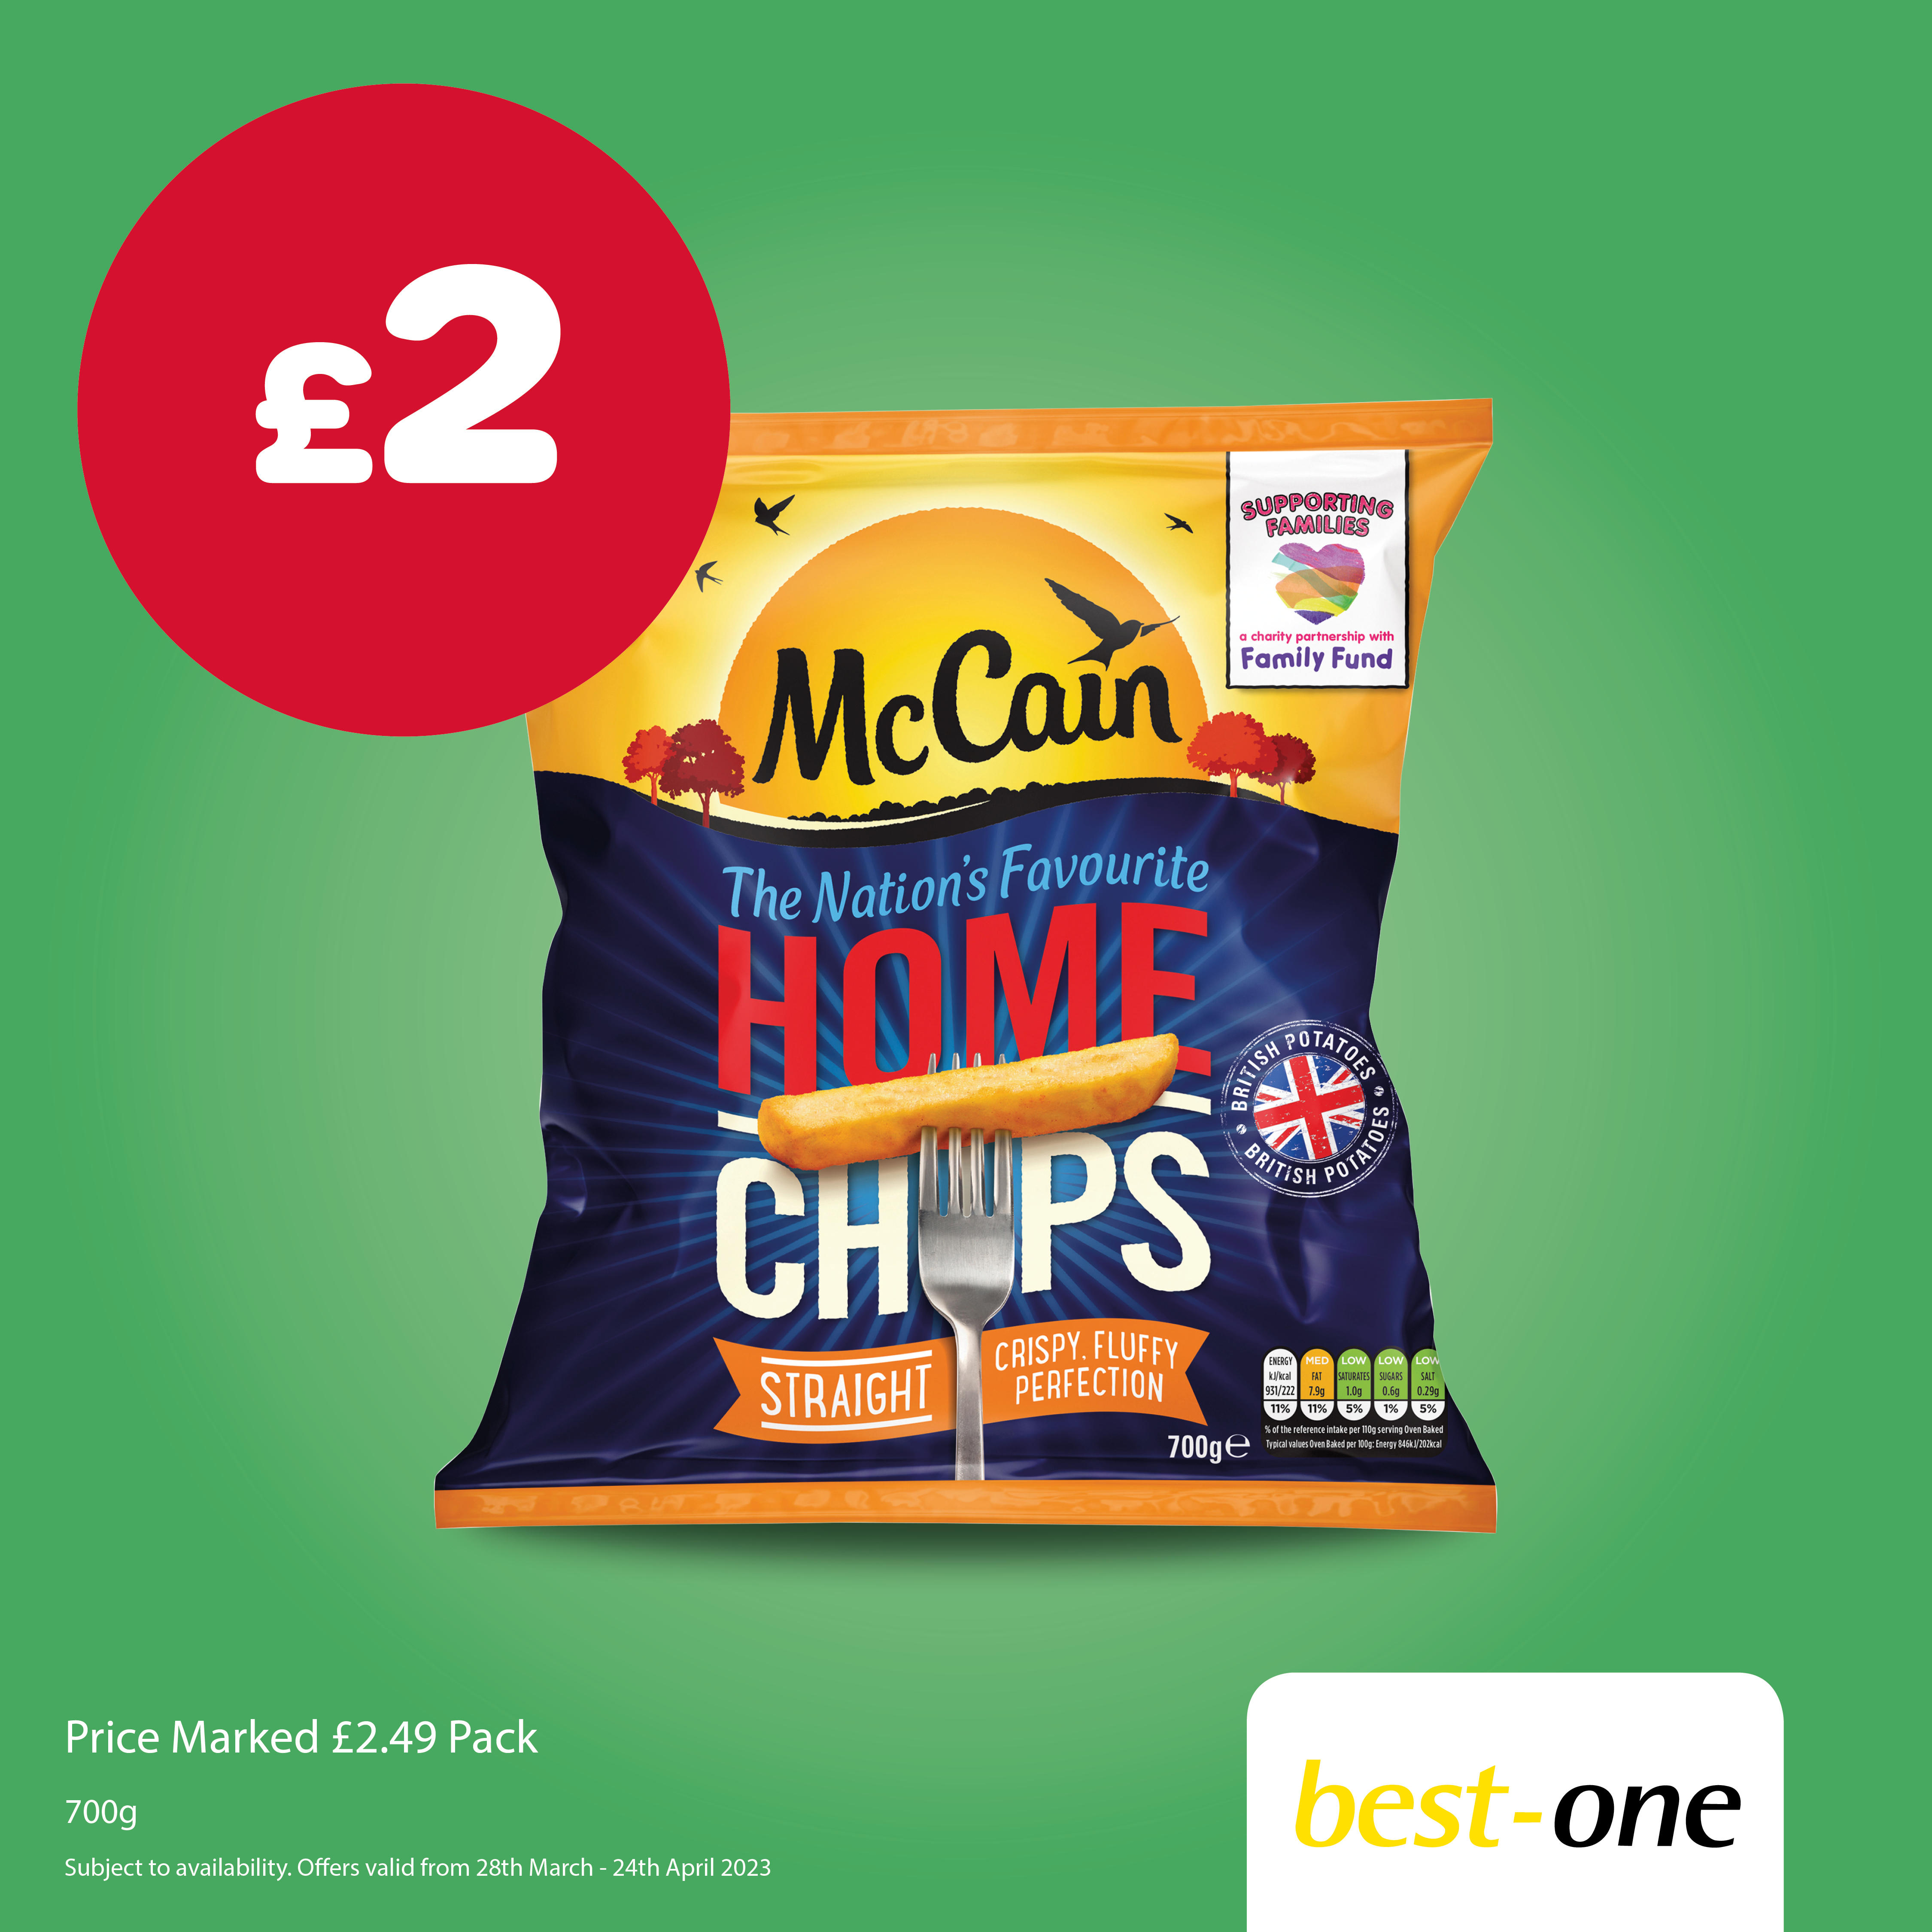 Buy McCain chips 700g for £2 each. Offer available from selected stores only on 28th March to 24th A South Hylton Convenience, Best-one Sunderland 020 8453 1234